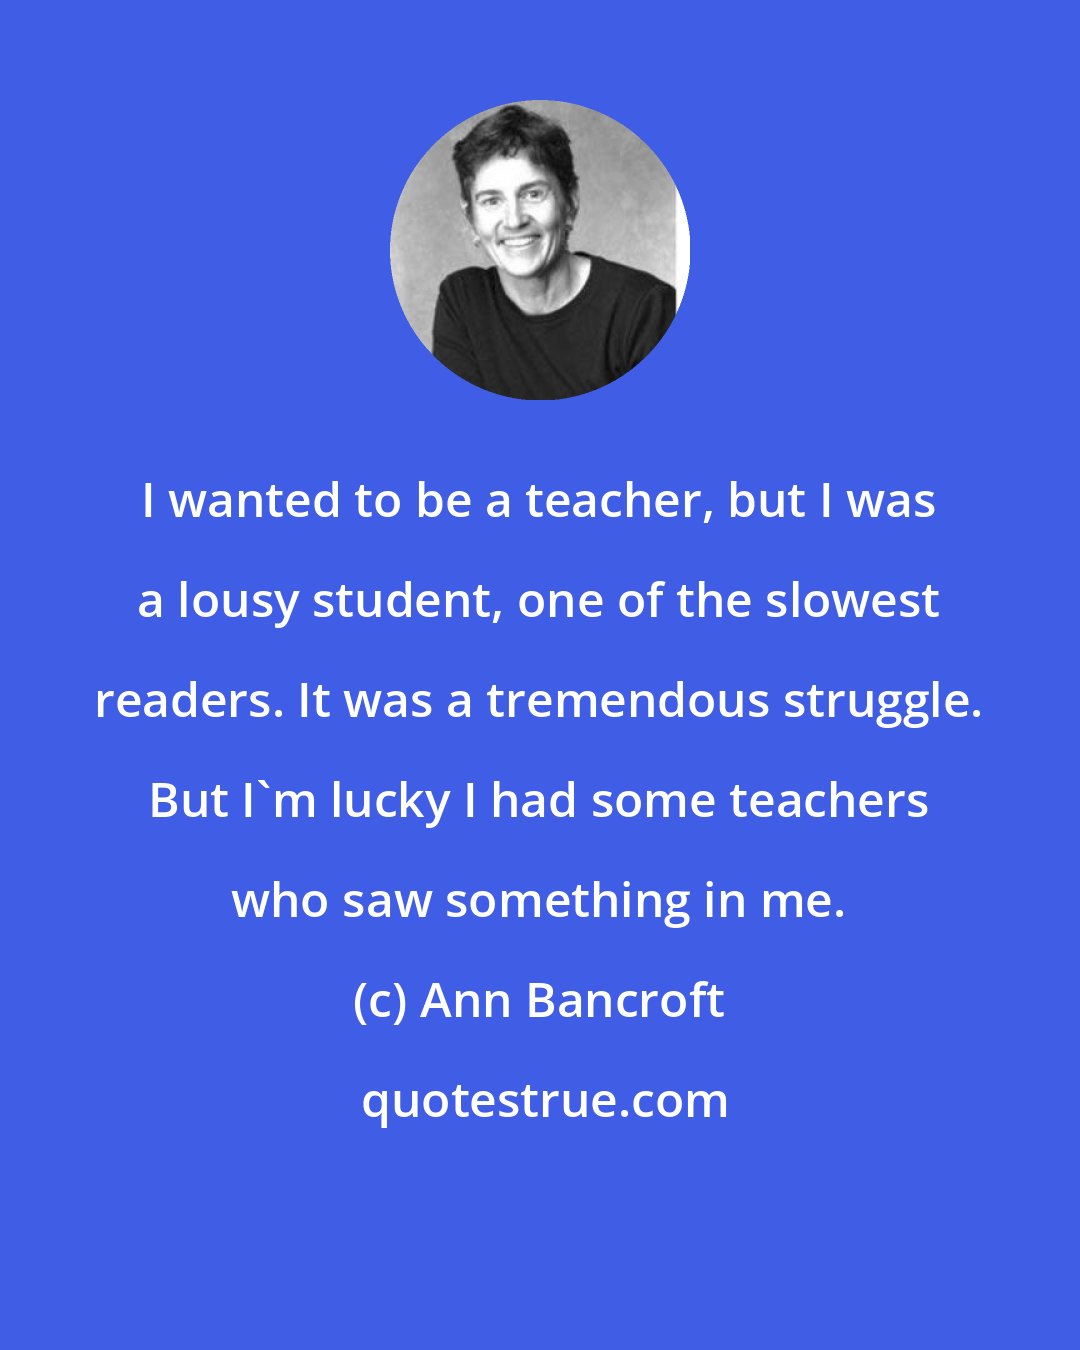 Ann Bancroft: I wanted to be a teacher, but I was a lousy student, one of the slowest readers. It was a tremendous struggle. But I'm lucky I had some teachers who saw something in me.